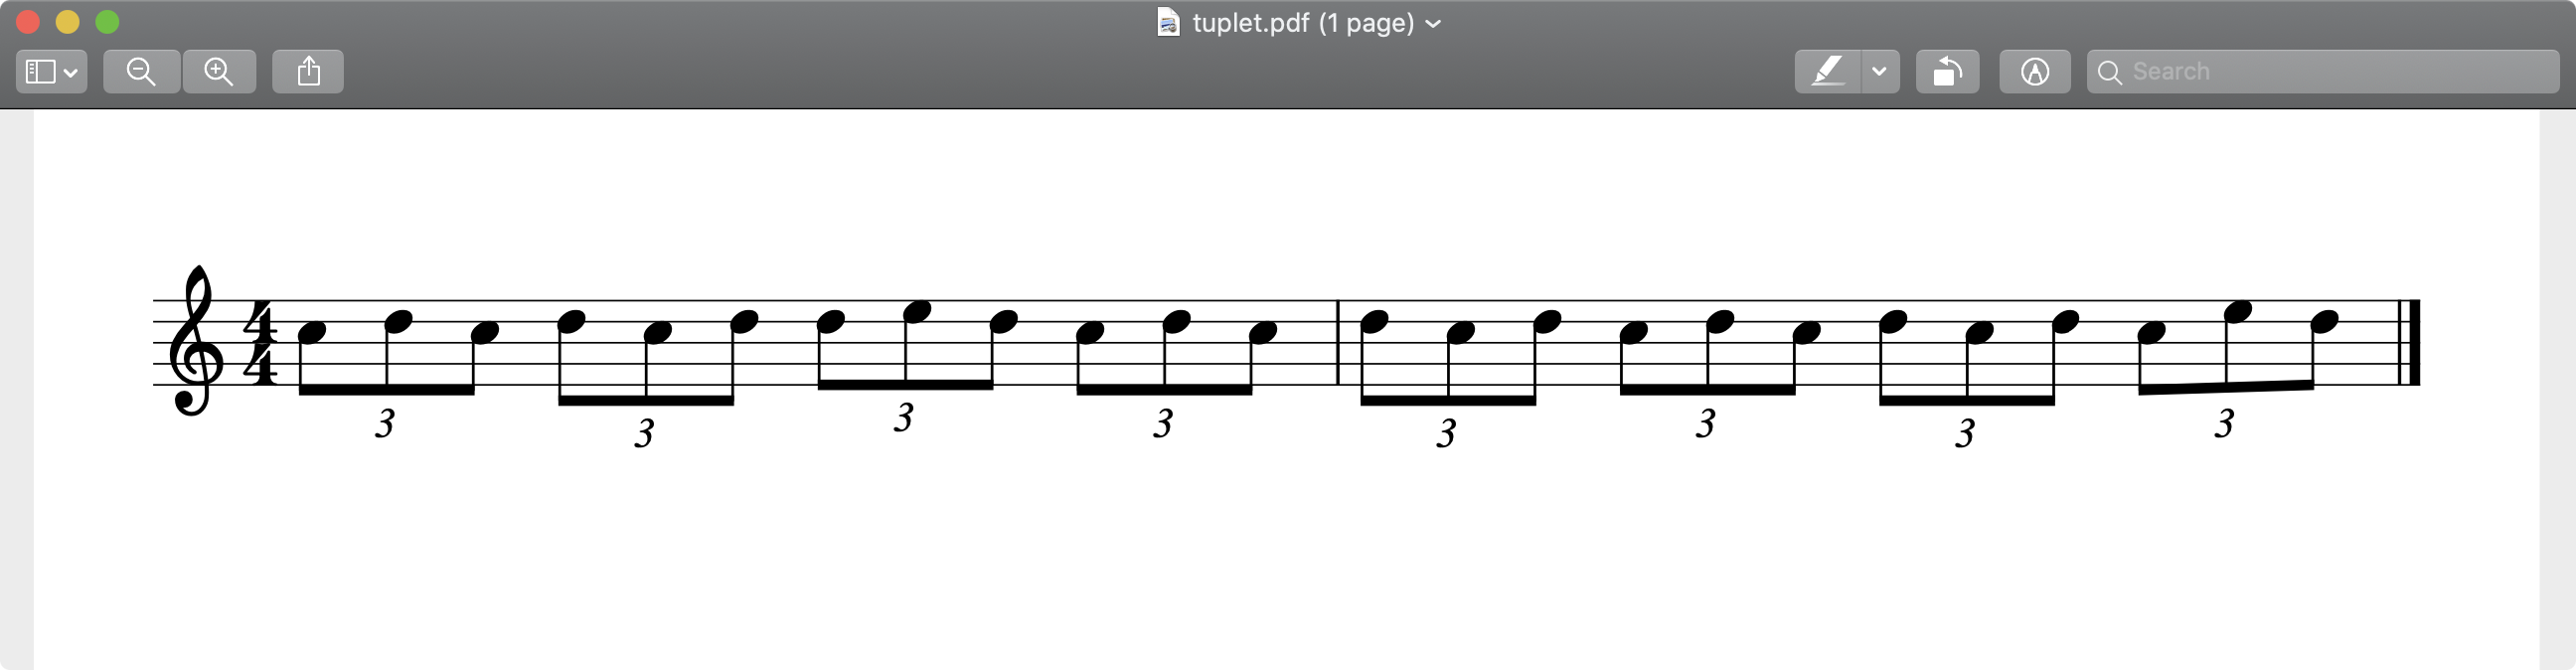 Making text invisible inMuseScore